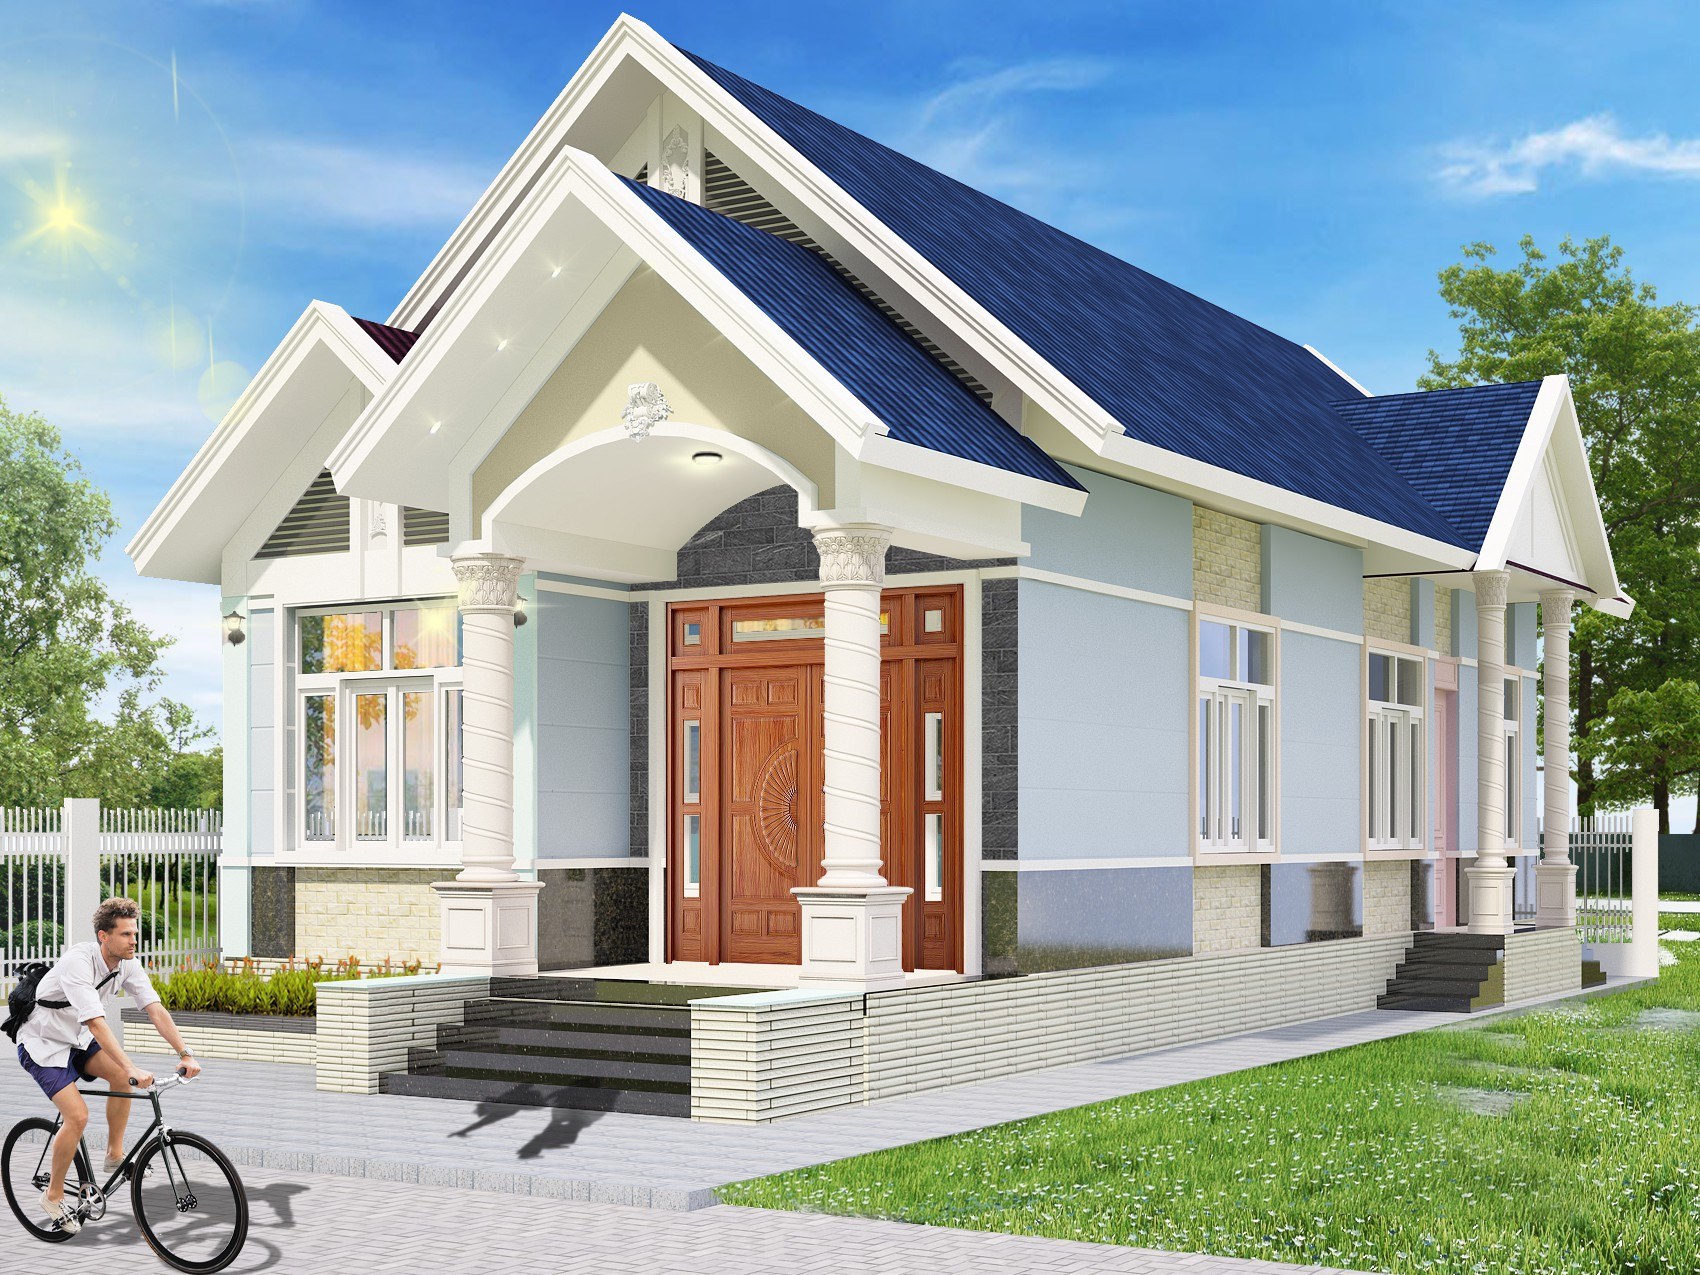 General provisions on homeownership in Vietnam